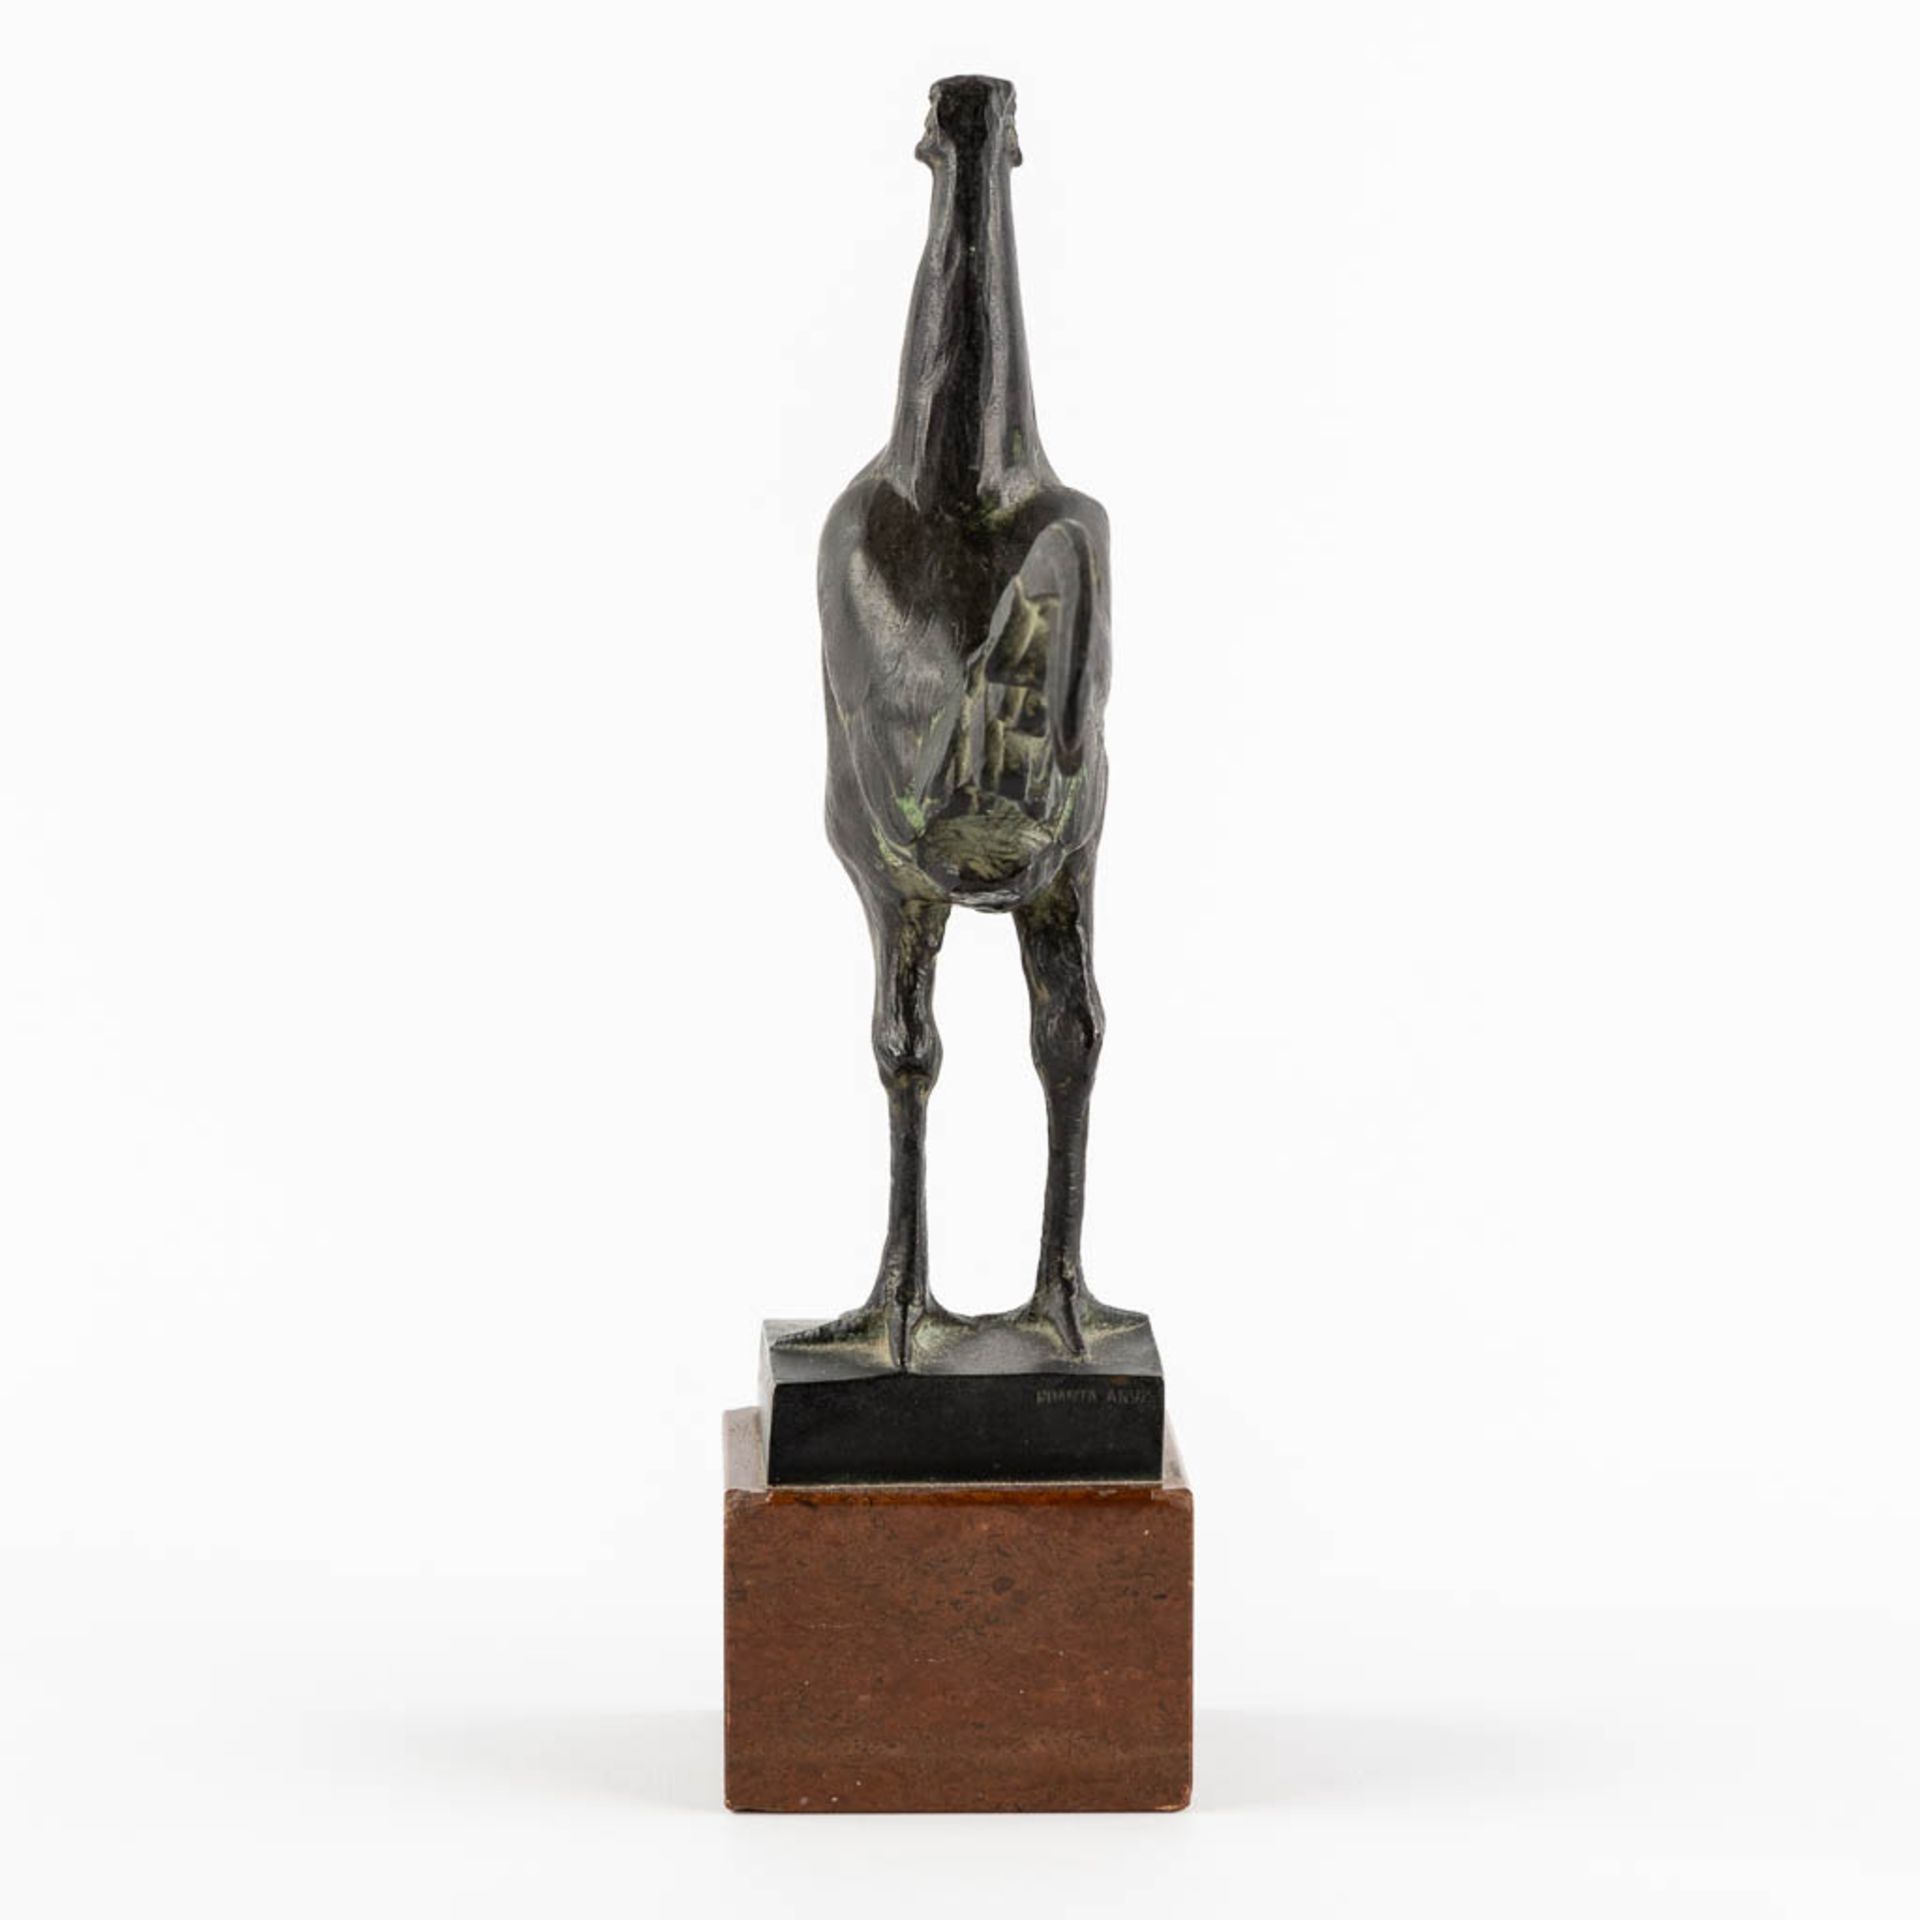 K. STACHOWSKY (XIX-XX) 'Rooster' patinated bronze on marble. (L:15 x W:7 x H:26 cm) - Image 5 of 11